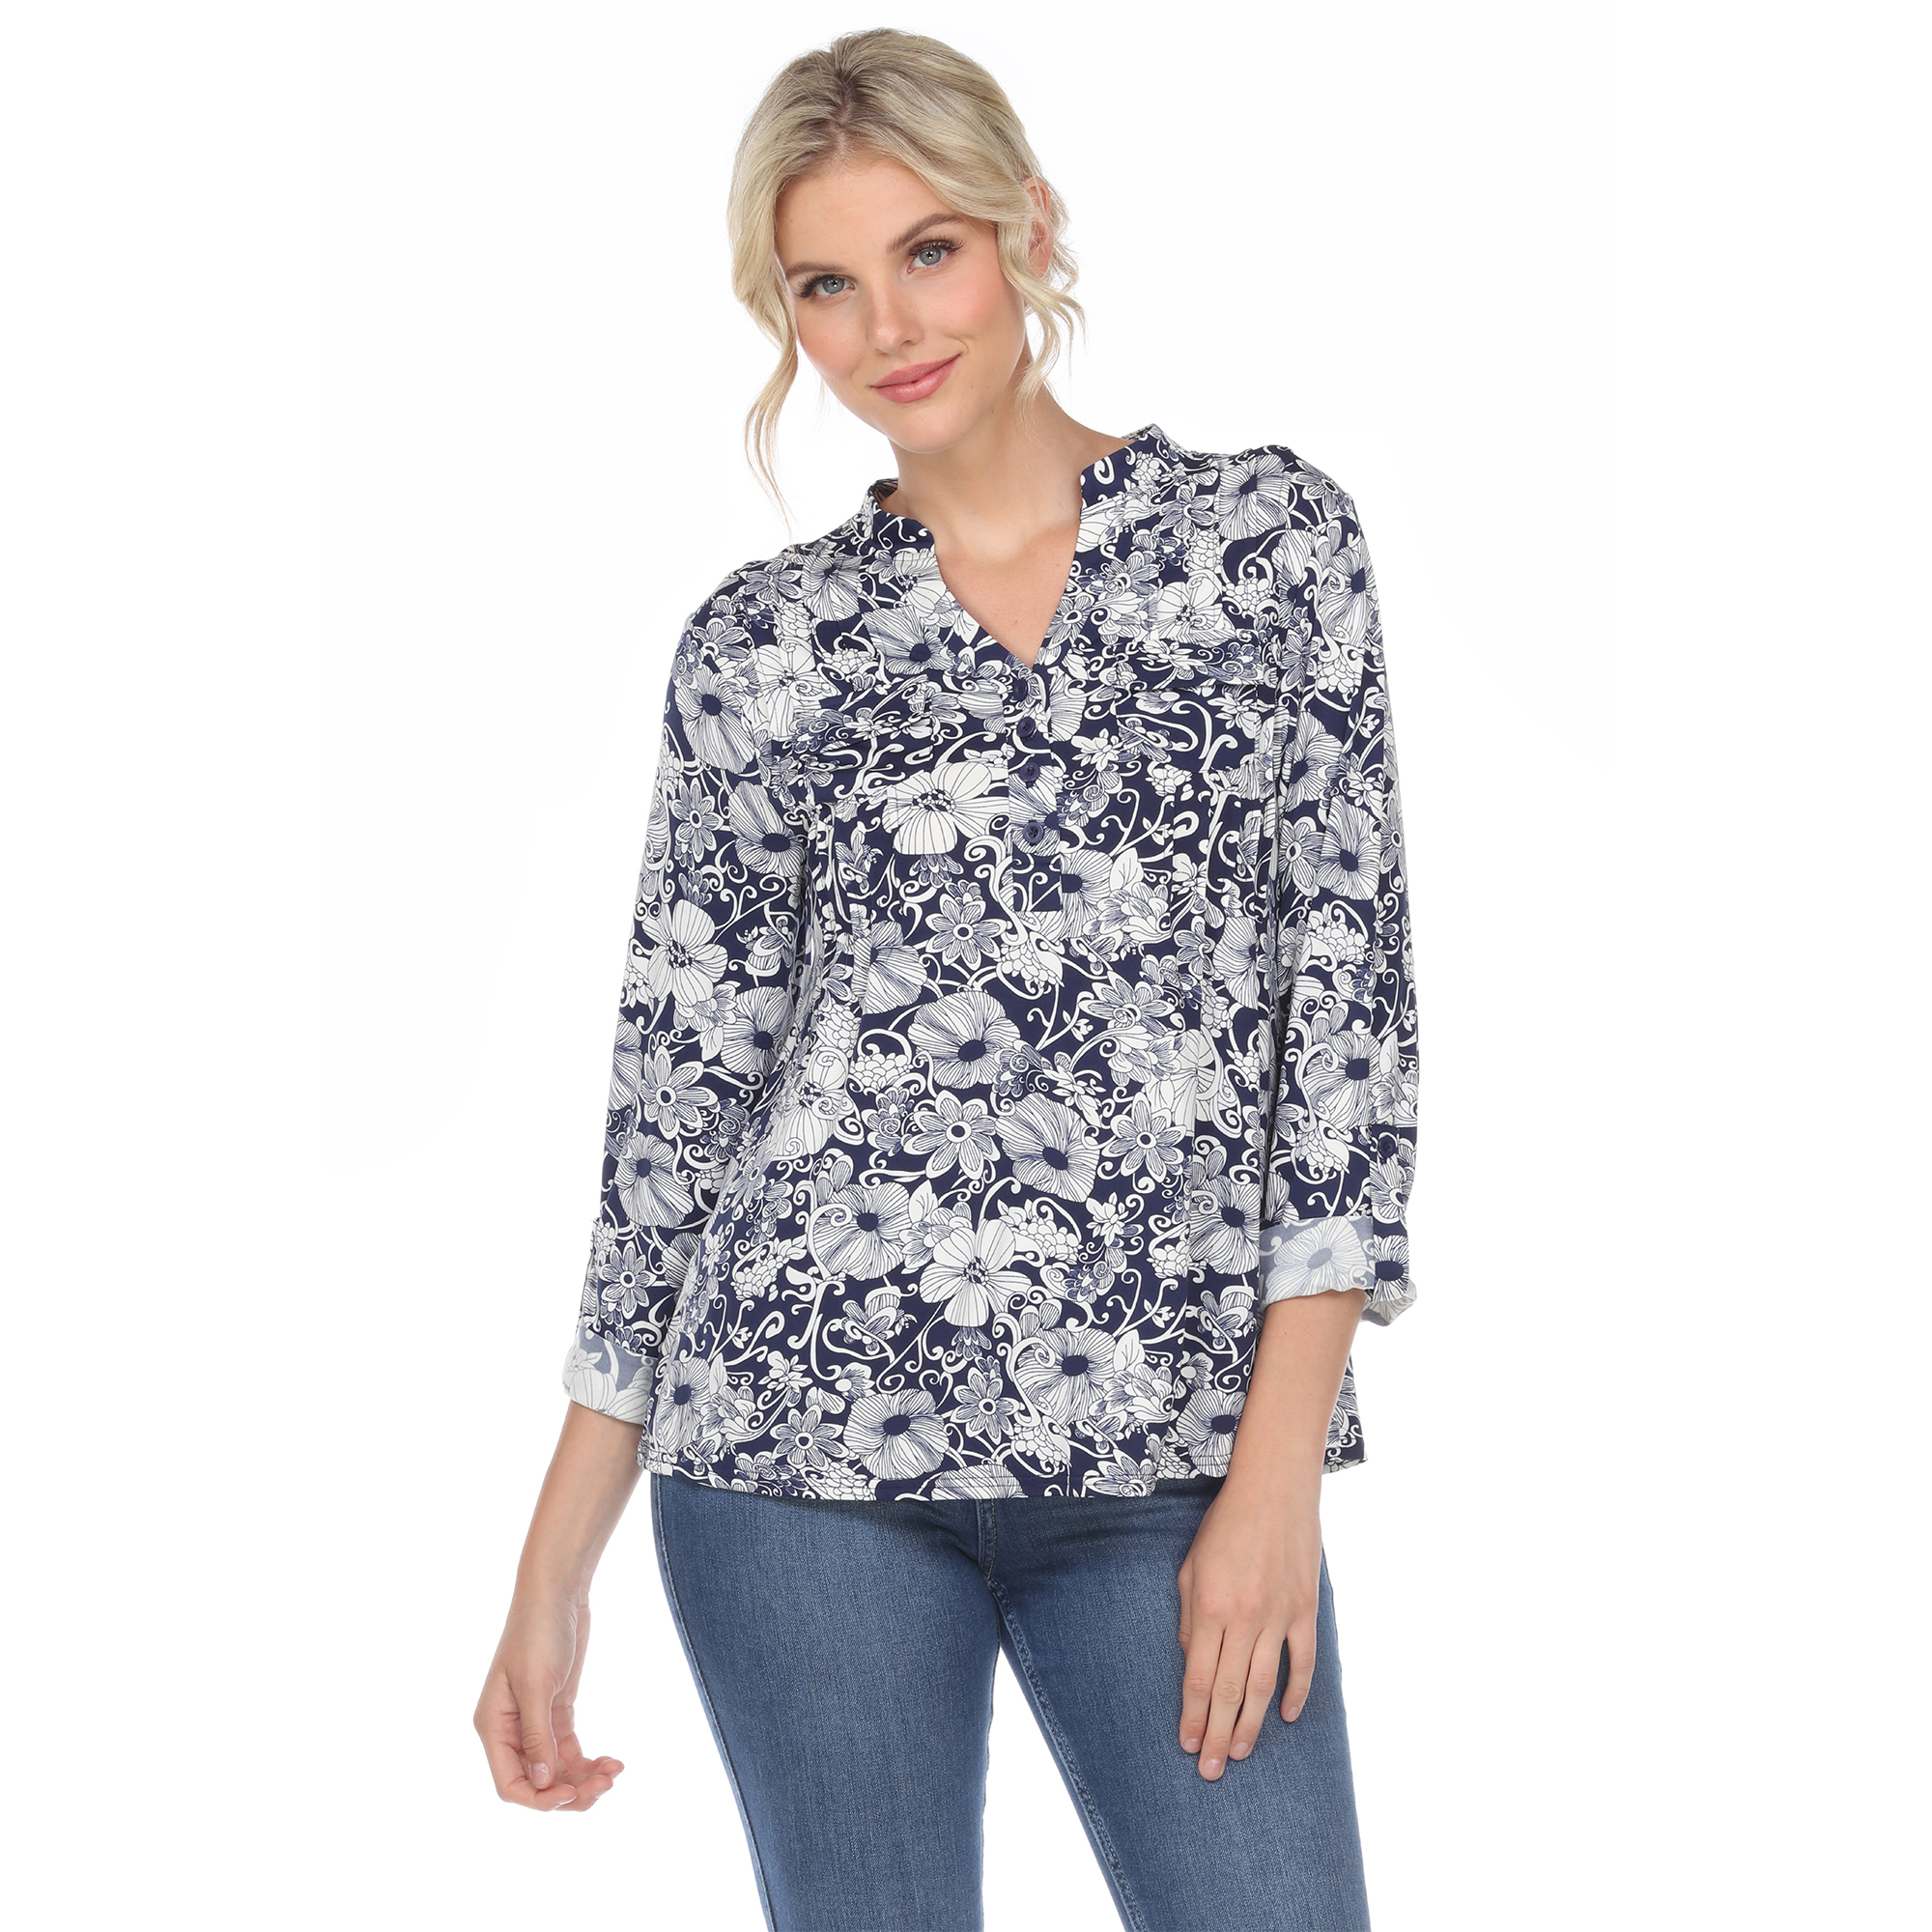 White Mark Women's Pleated Long Sleeve Floral Print Blouse - Black, Small